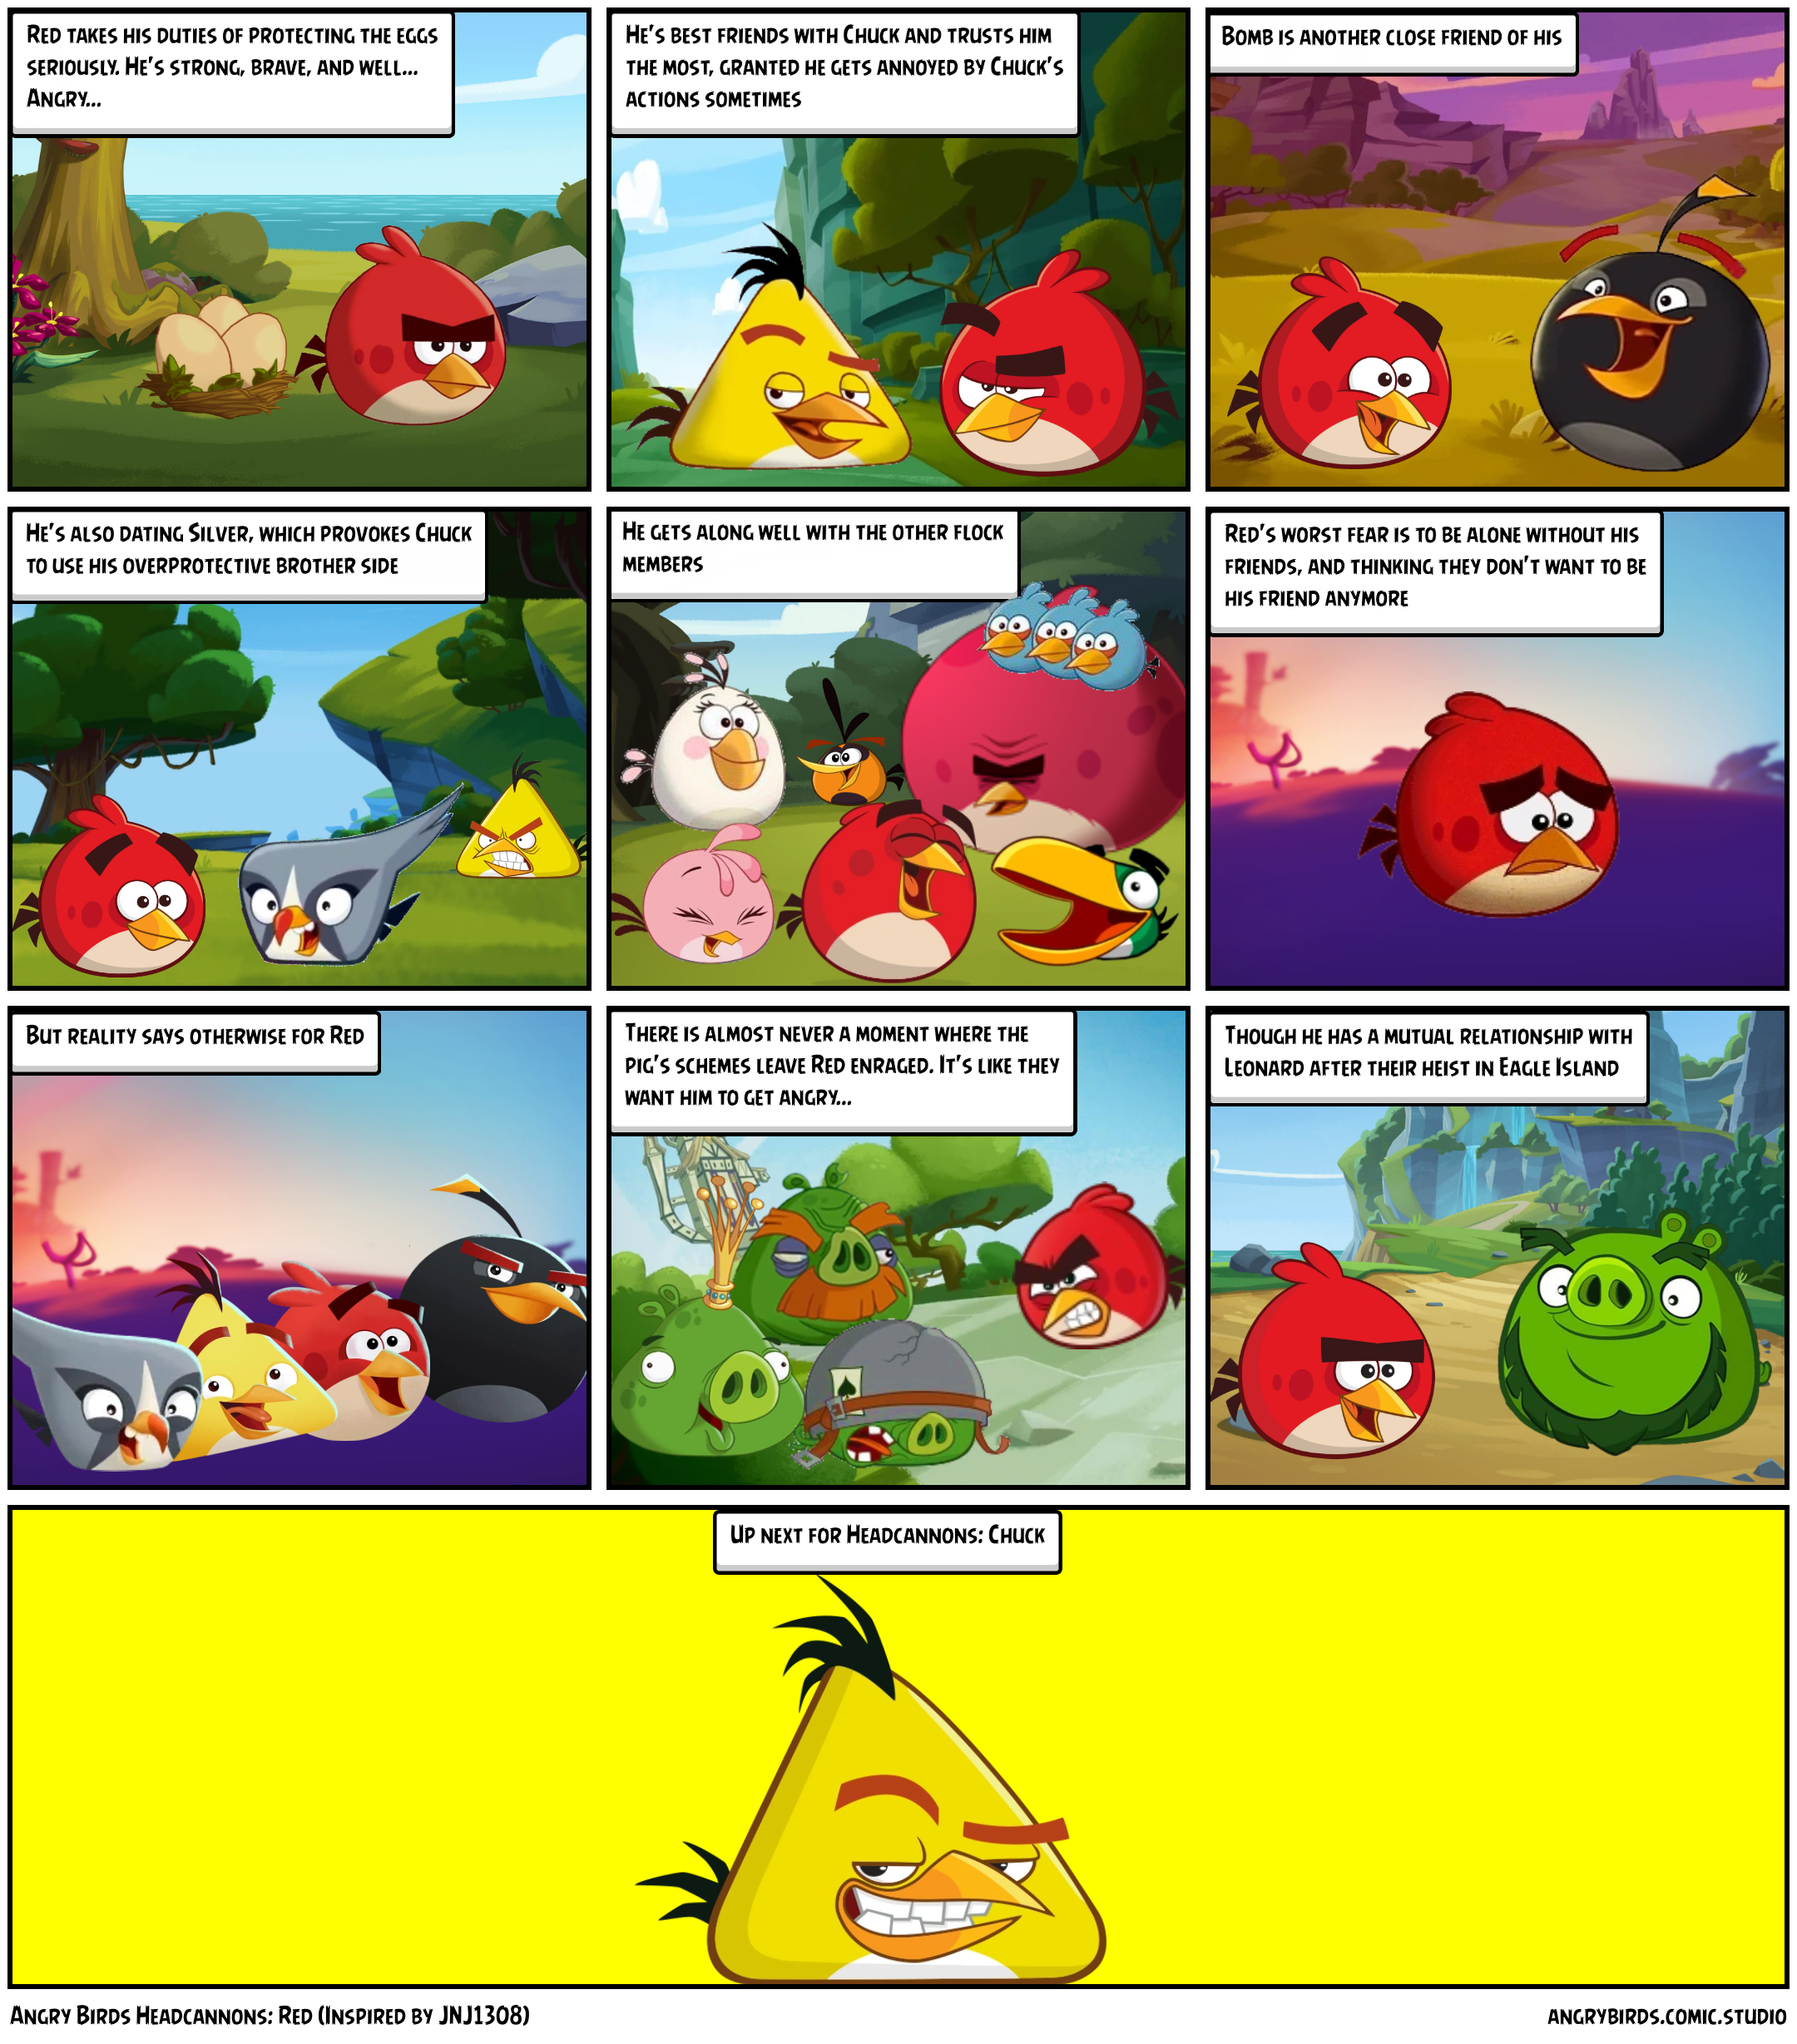 Angry Birds Headcannons: Red (Inspired by JNJ1308)